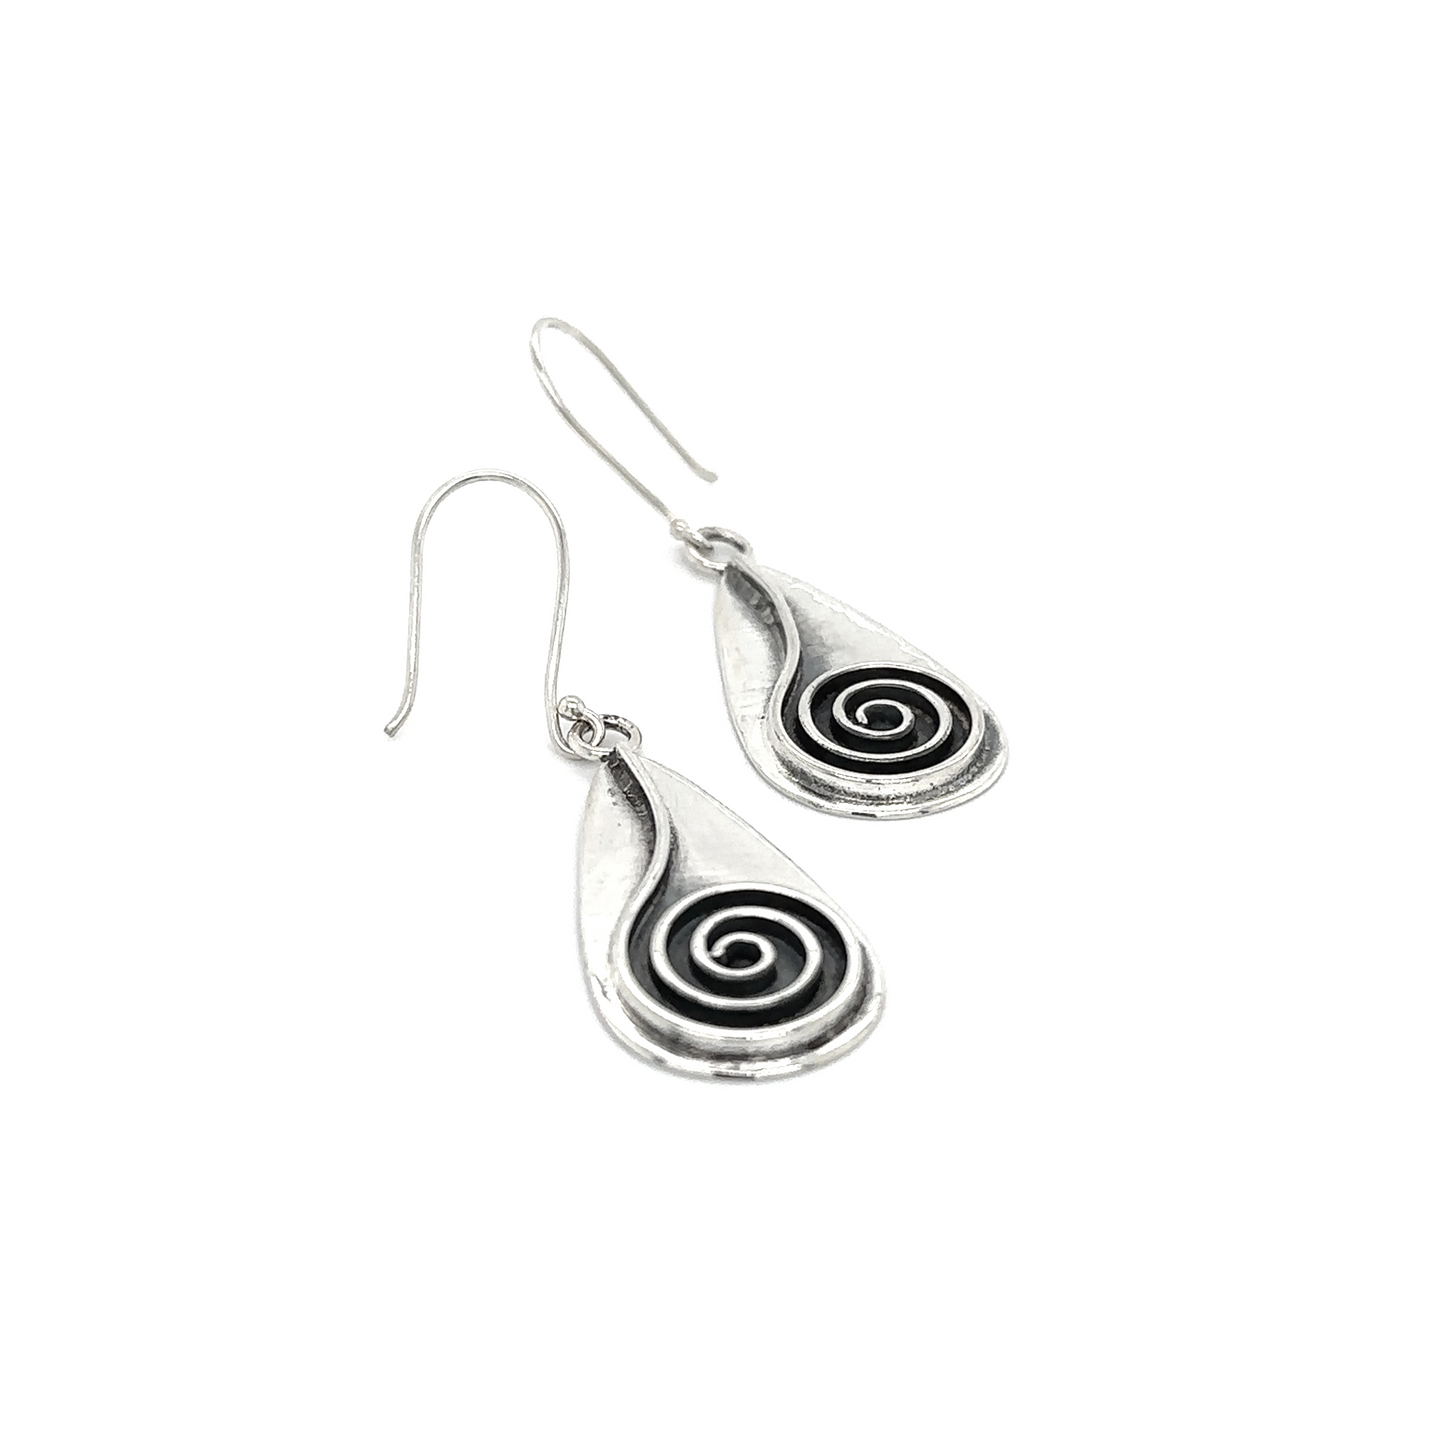 These stunning Super Silver Statement Teardrop Spiral earrings showcase an ancient symbol, exuding cosmic energy.